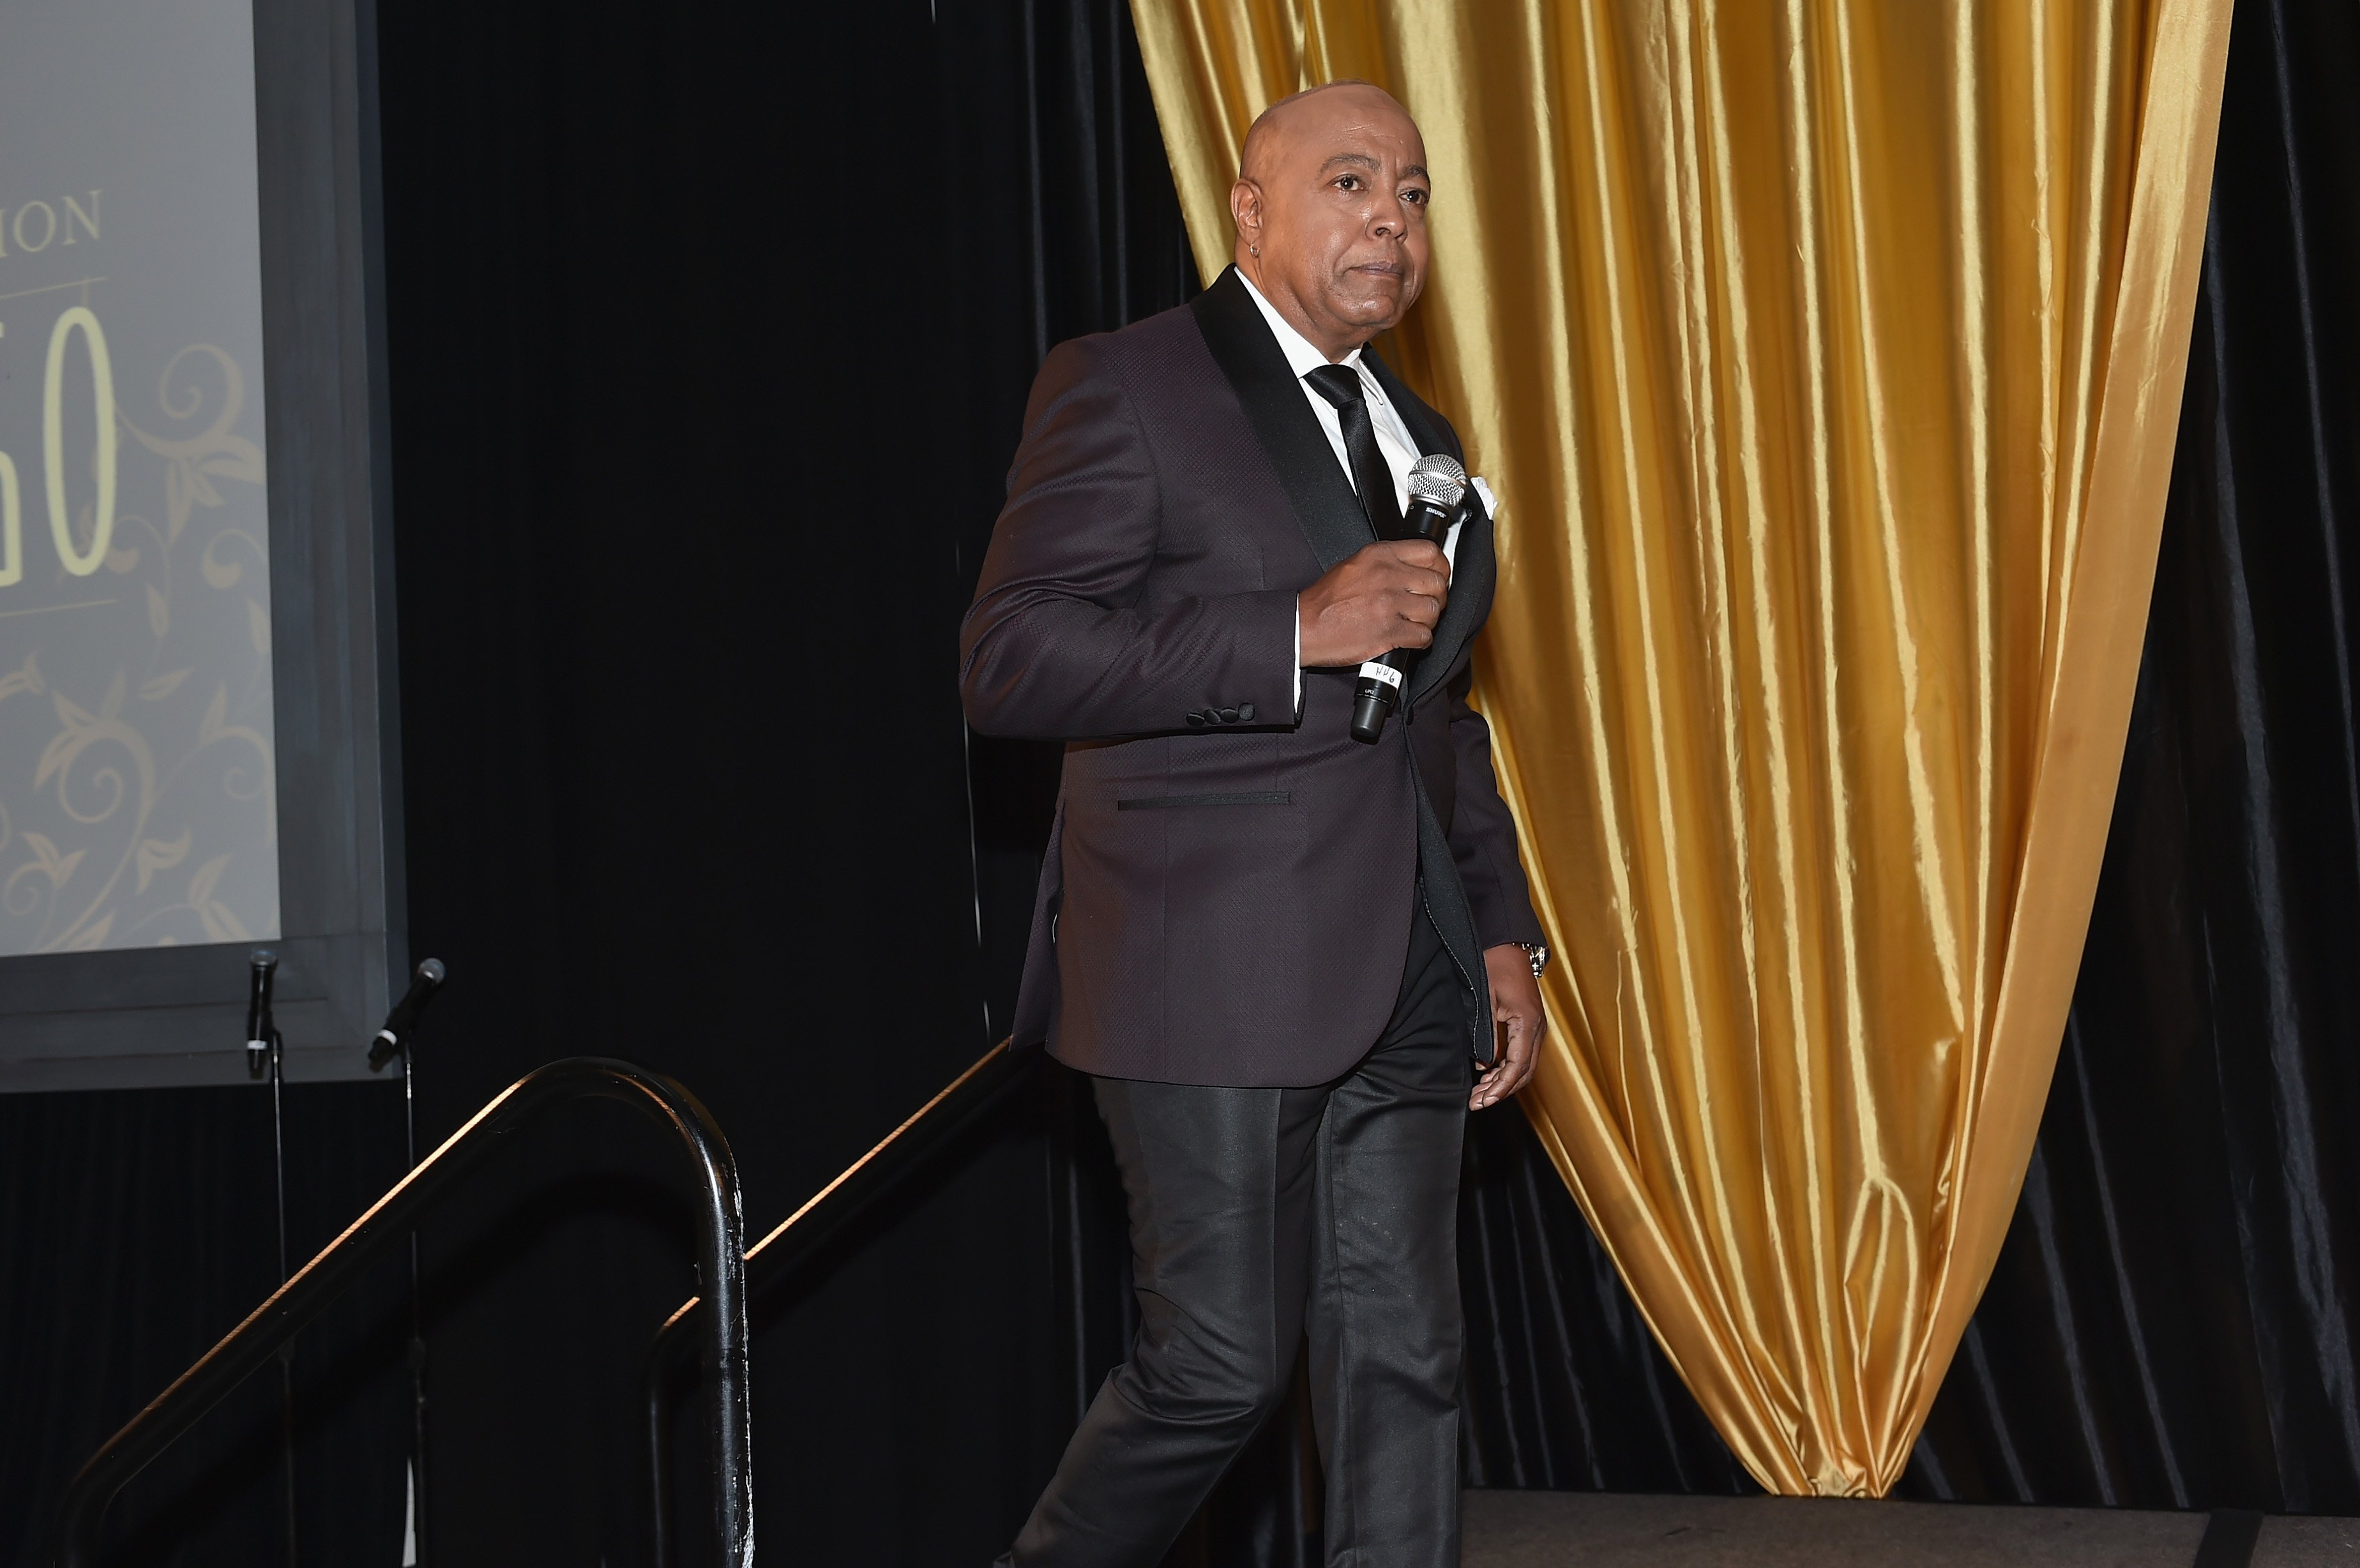 Peabo Bryson performs at the 2017 DMF Care for Congo Gala at St. Regis Hotel on September 16, 2017 in Atlanta, Georgia | Photo: GettyImages